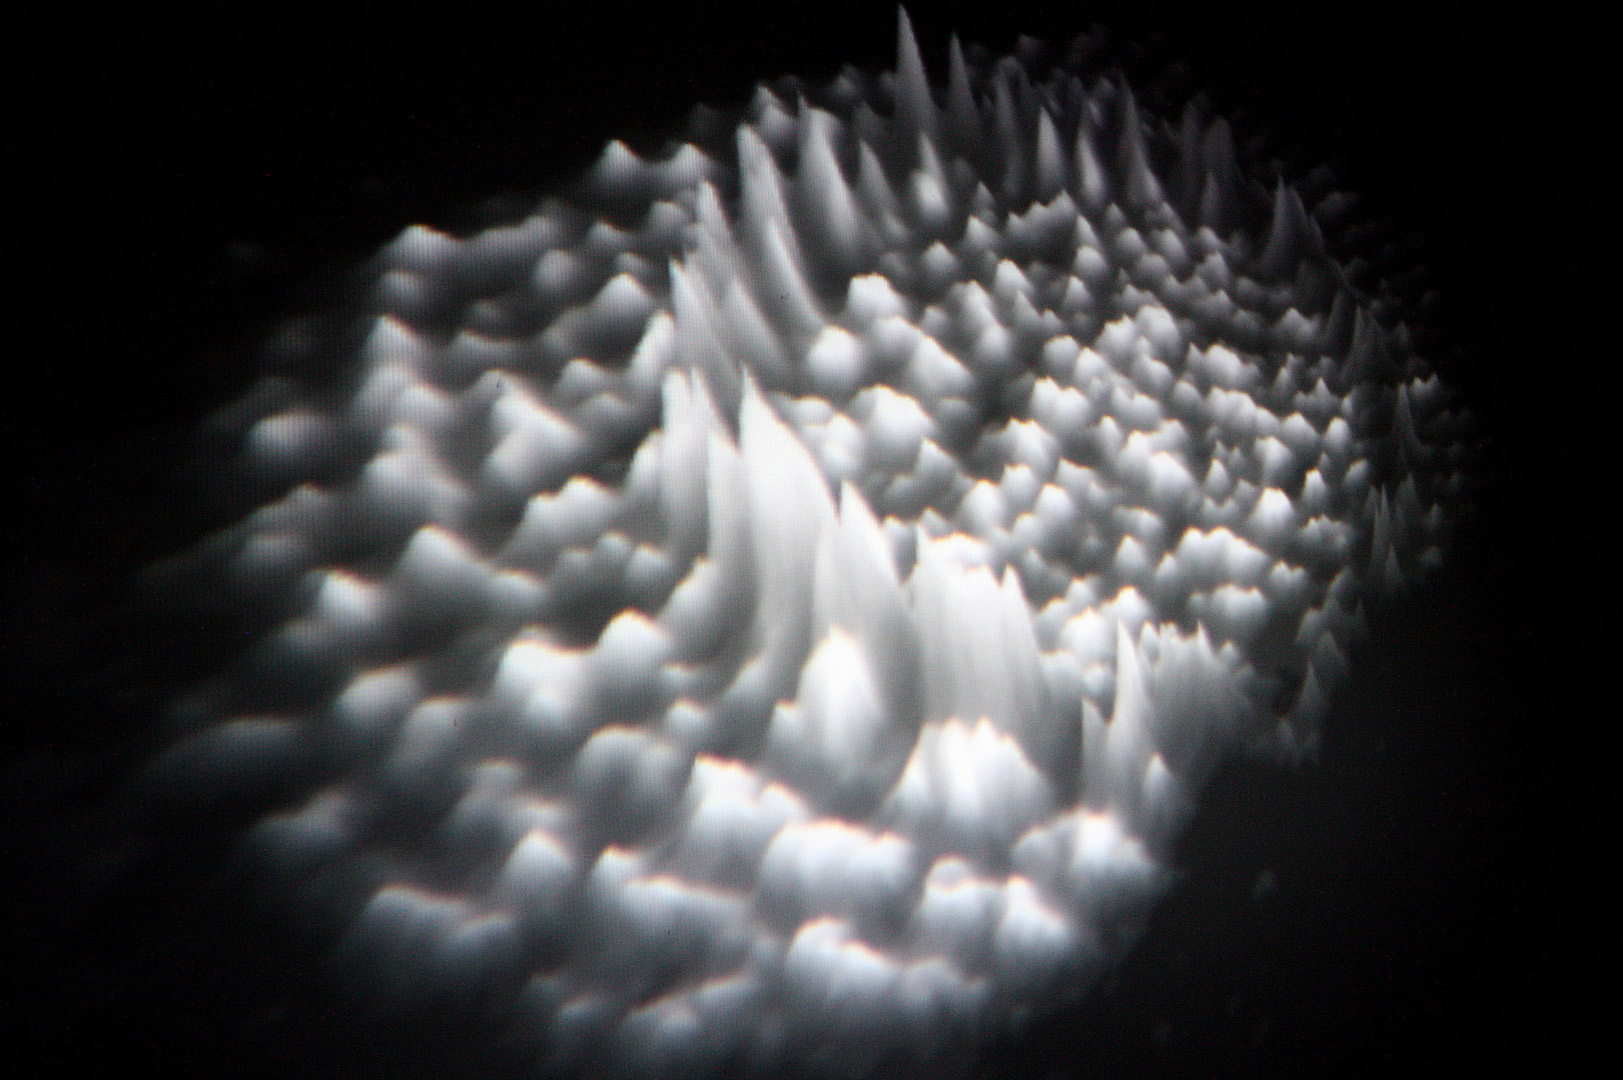 ©ISEA2014: 20th International Symposium on Electronic Art, Yoon Chung Han and Byeong-jun Han, Skin Pattern Data Sonification as Personalized Media Art Experience